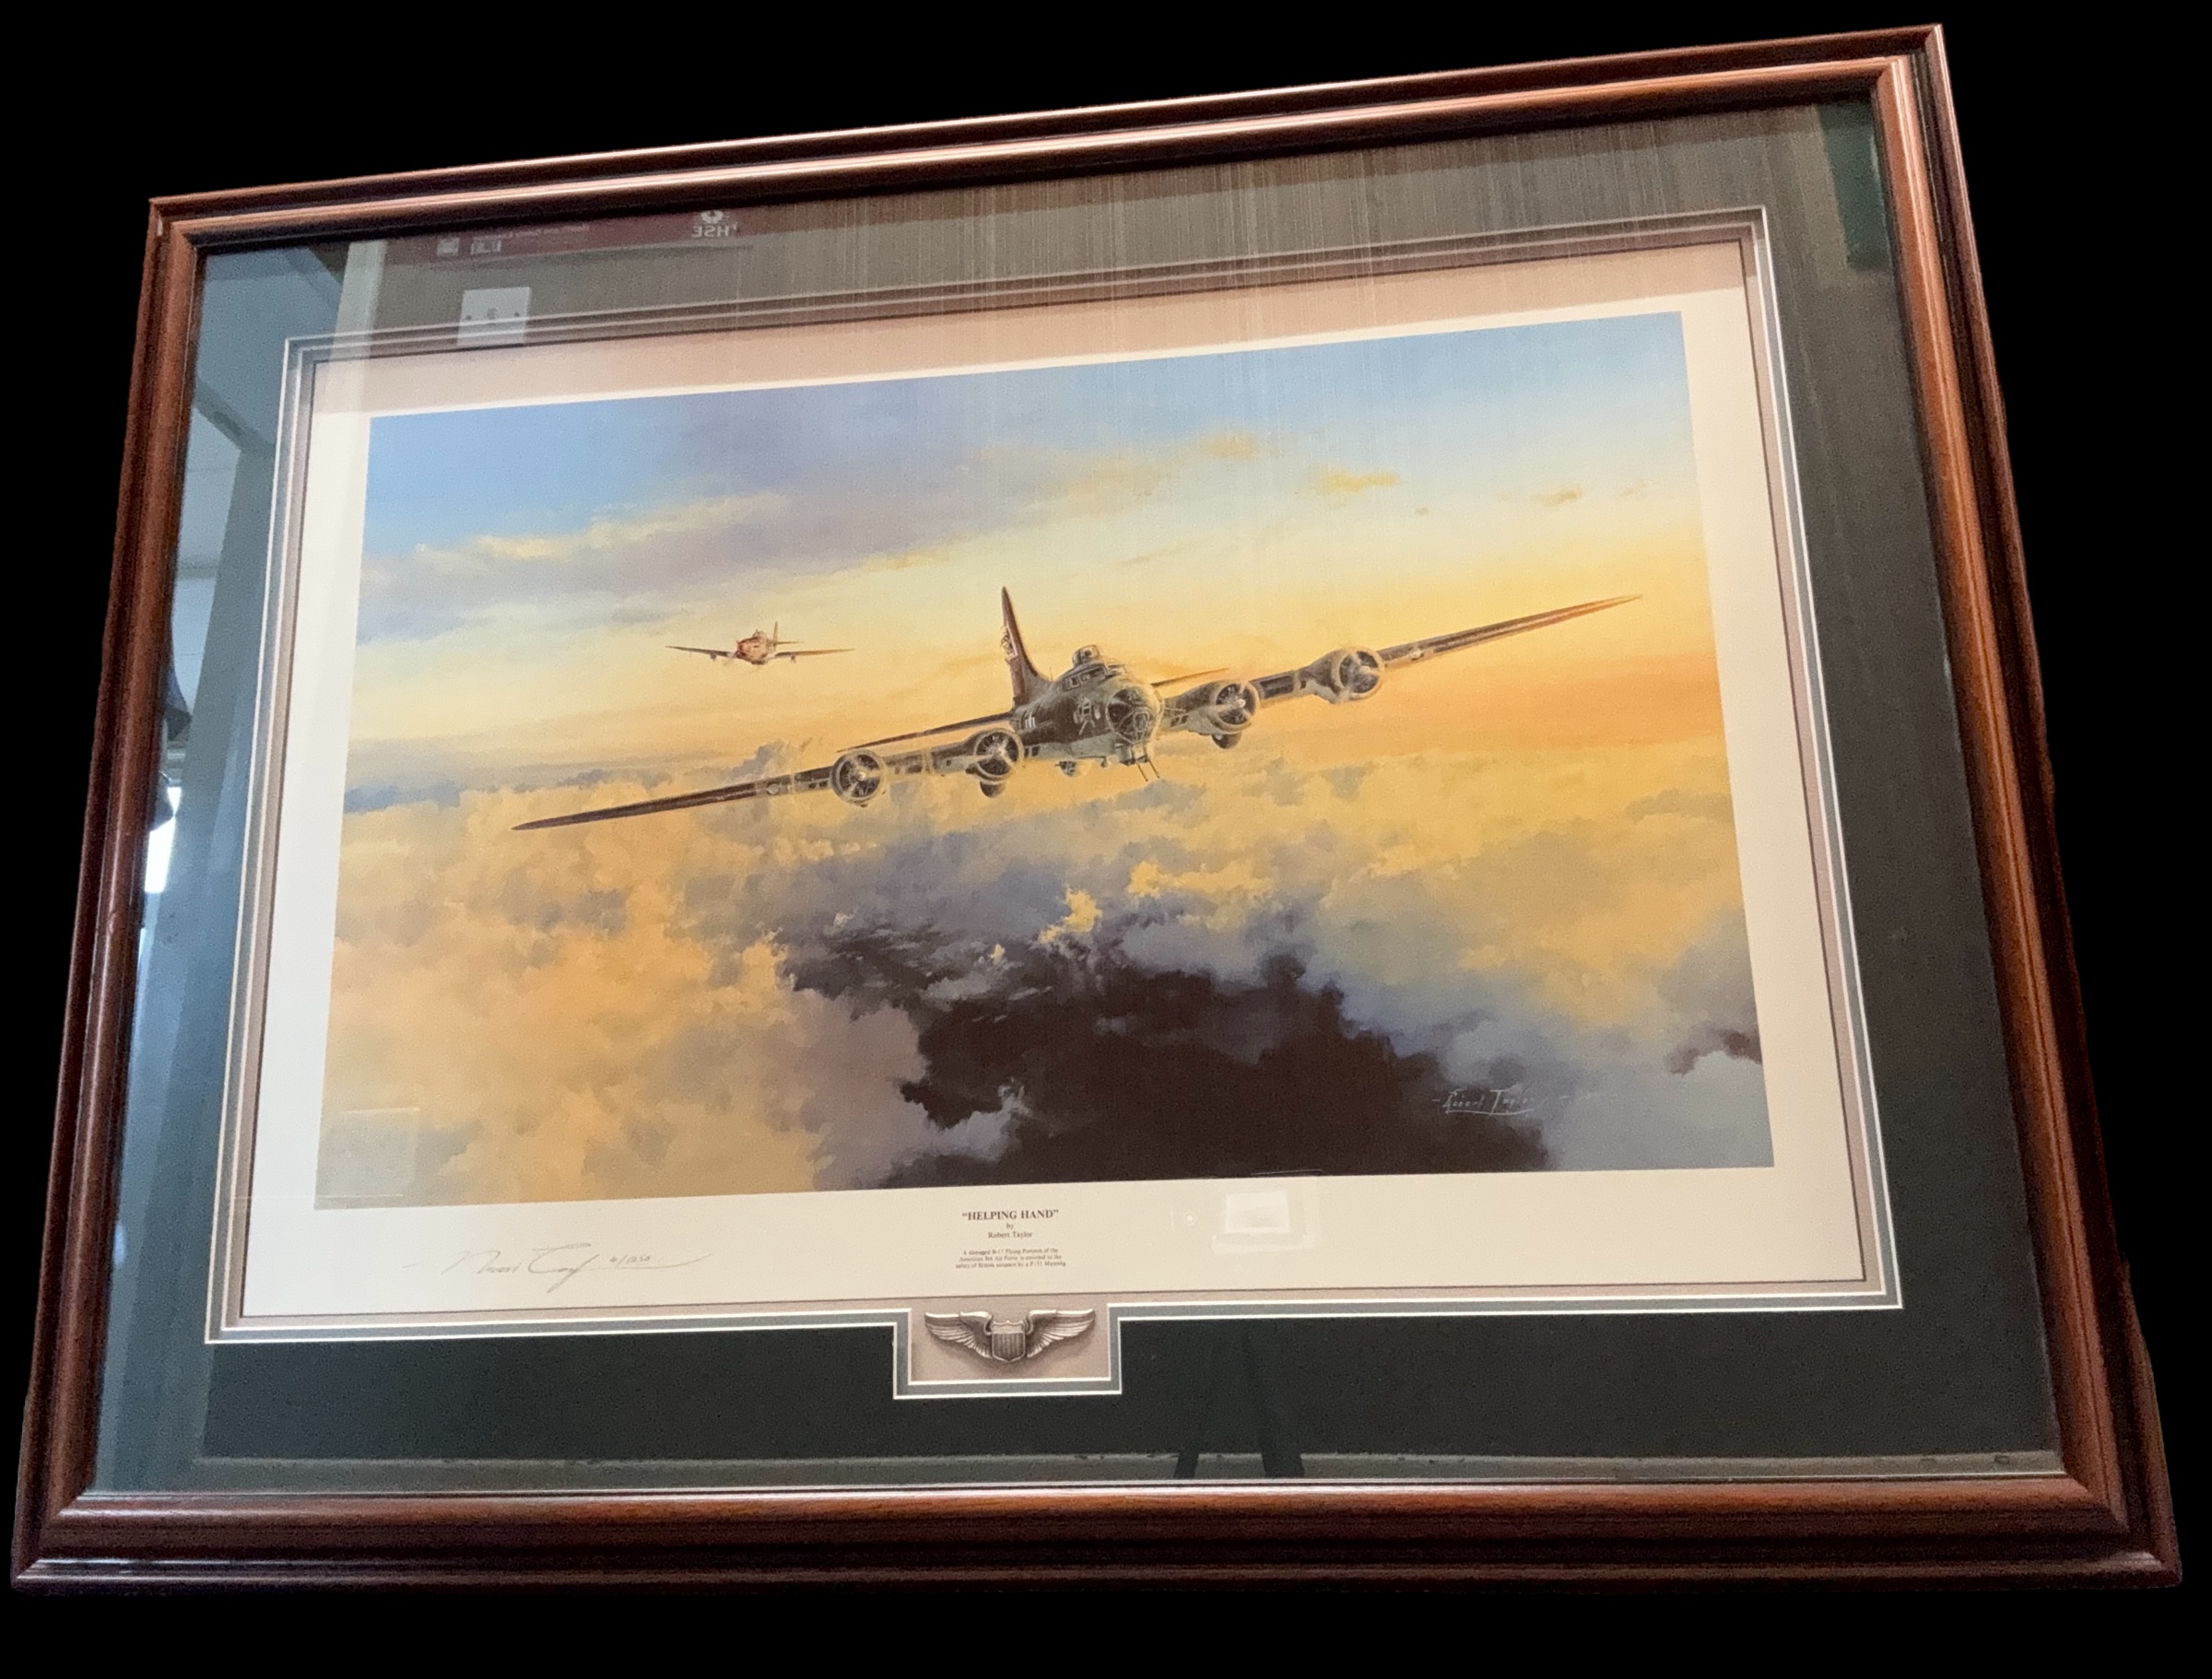 Helping Hand WWII 37x28 inch framed and mounted print limited edition 4/1250 signed in pencil by the - Image 2 of 3